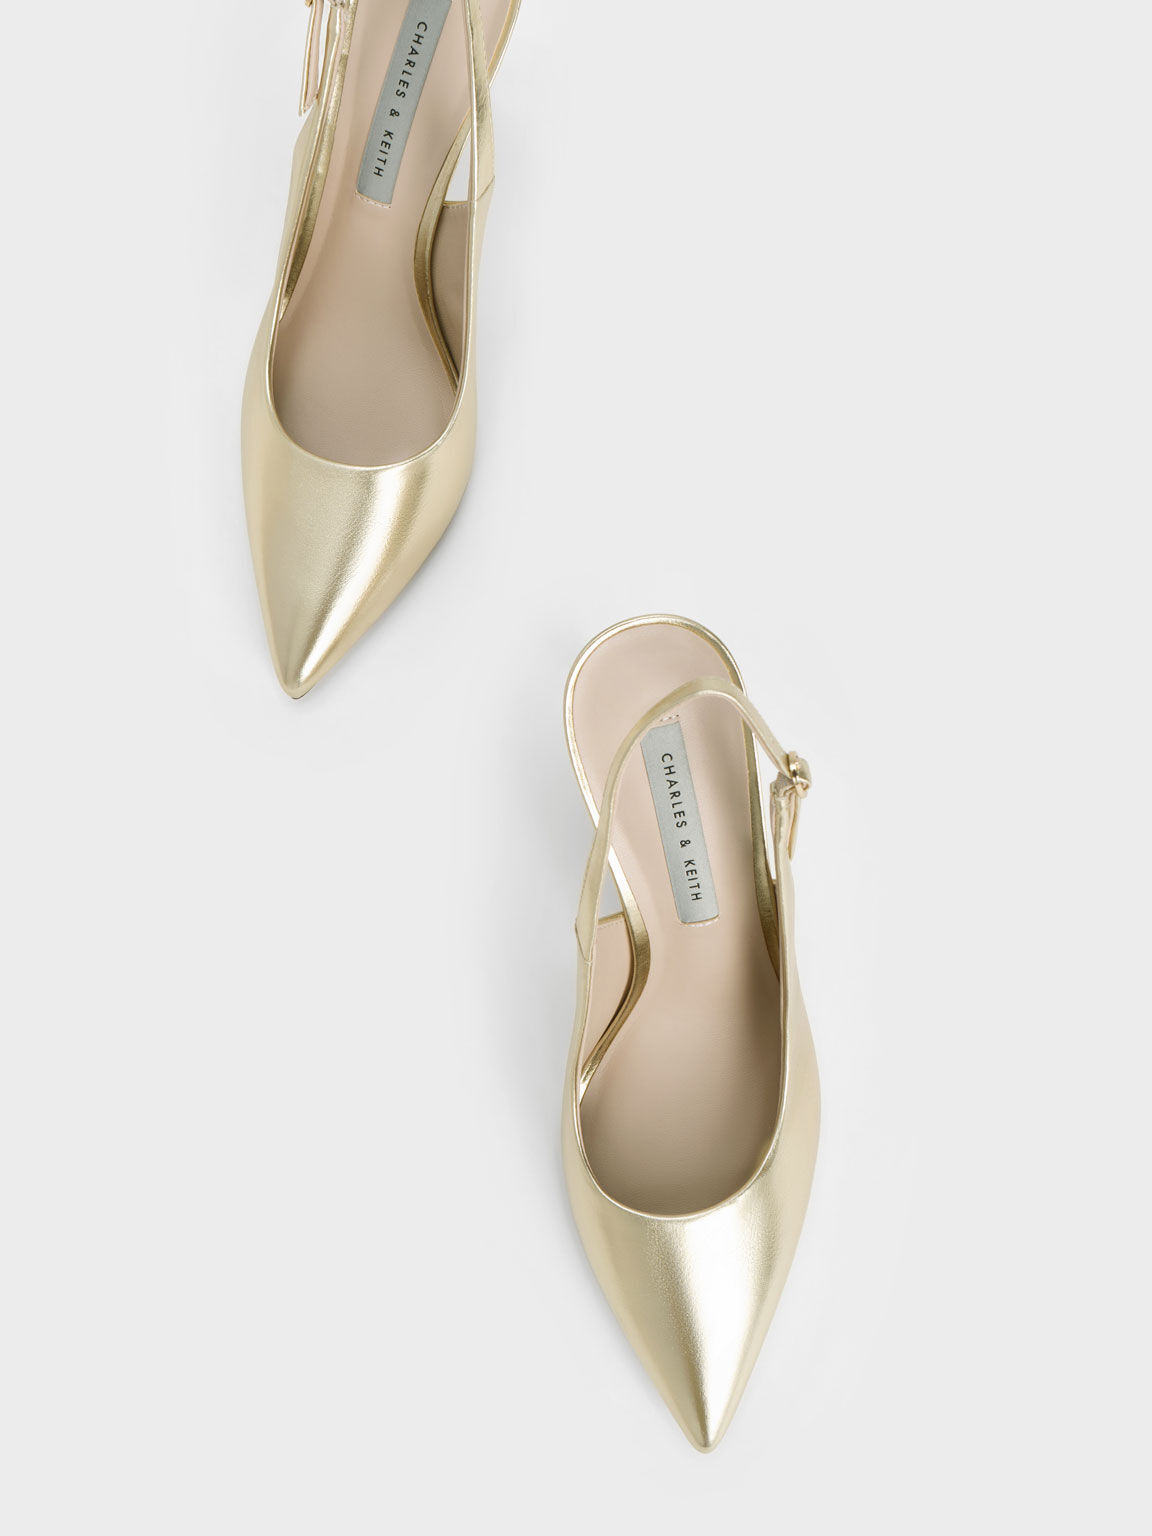 Gold shoes natural leather stiletto with high heels slightly pointed toe tip